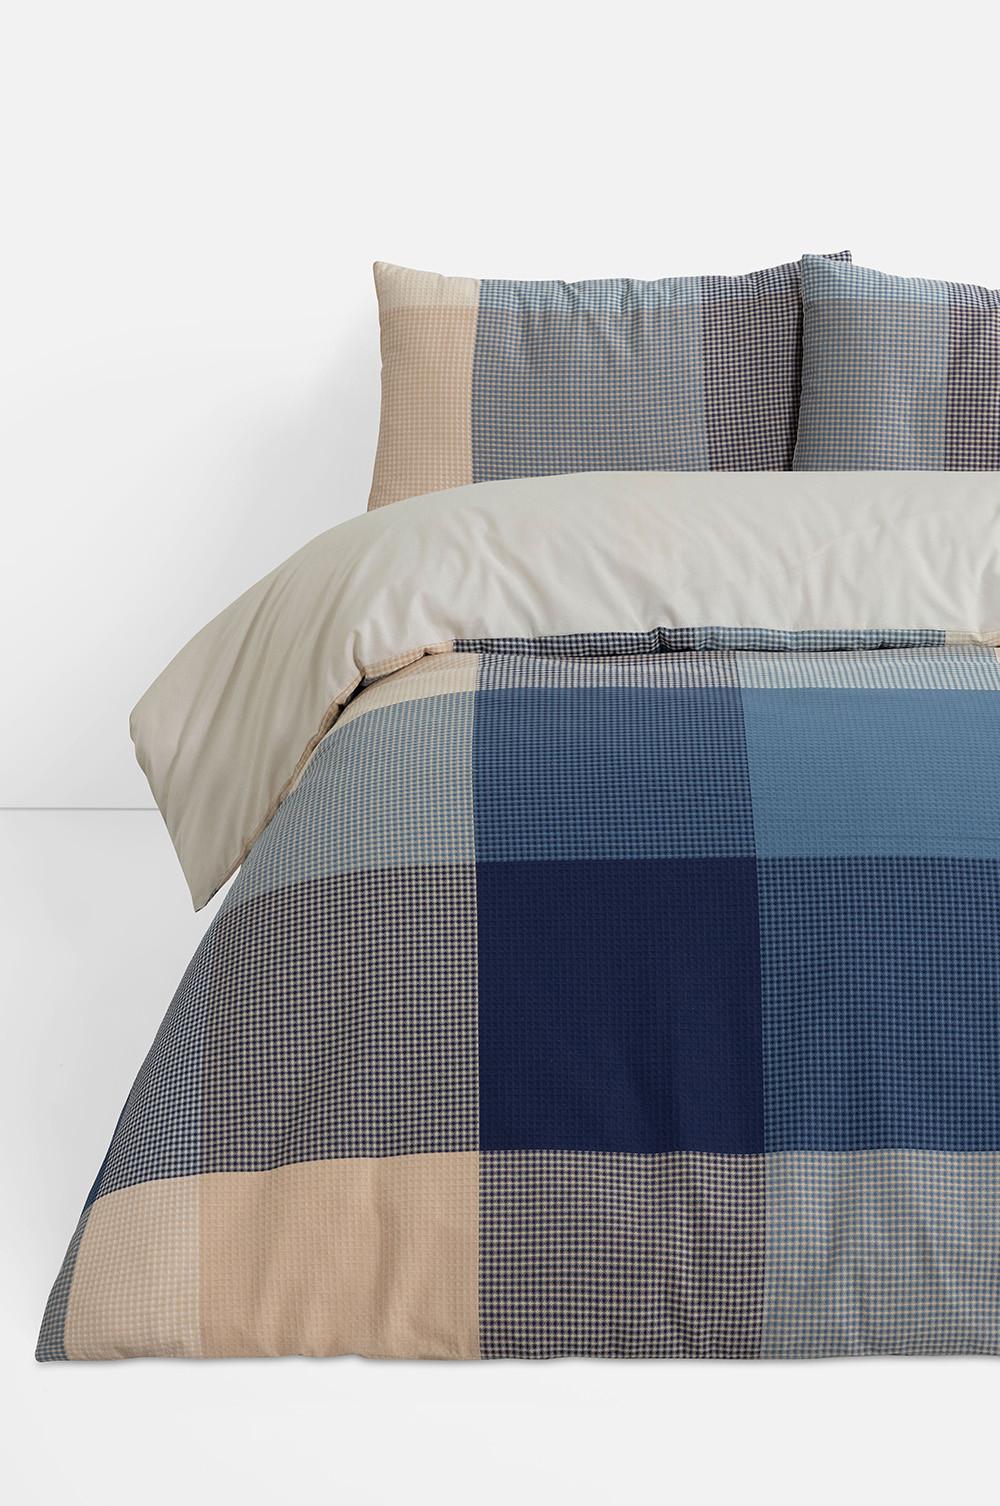 Is your duvet the right tog rating?